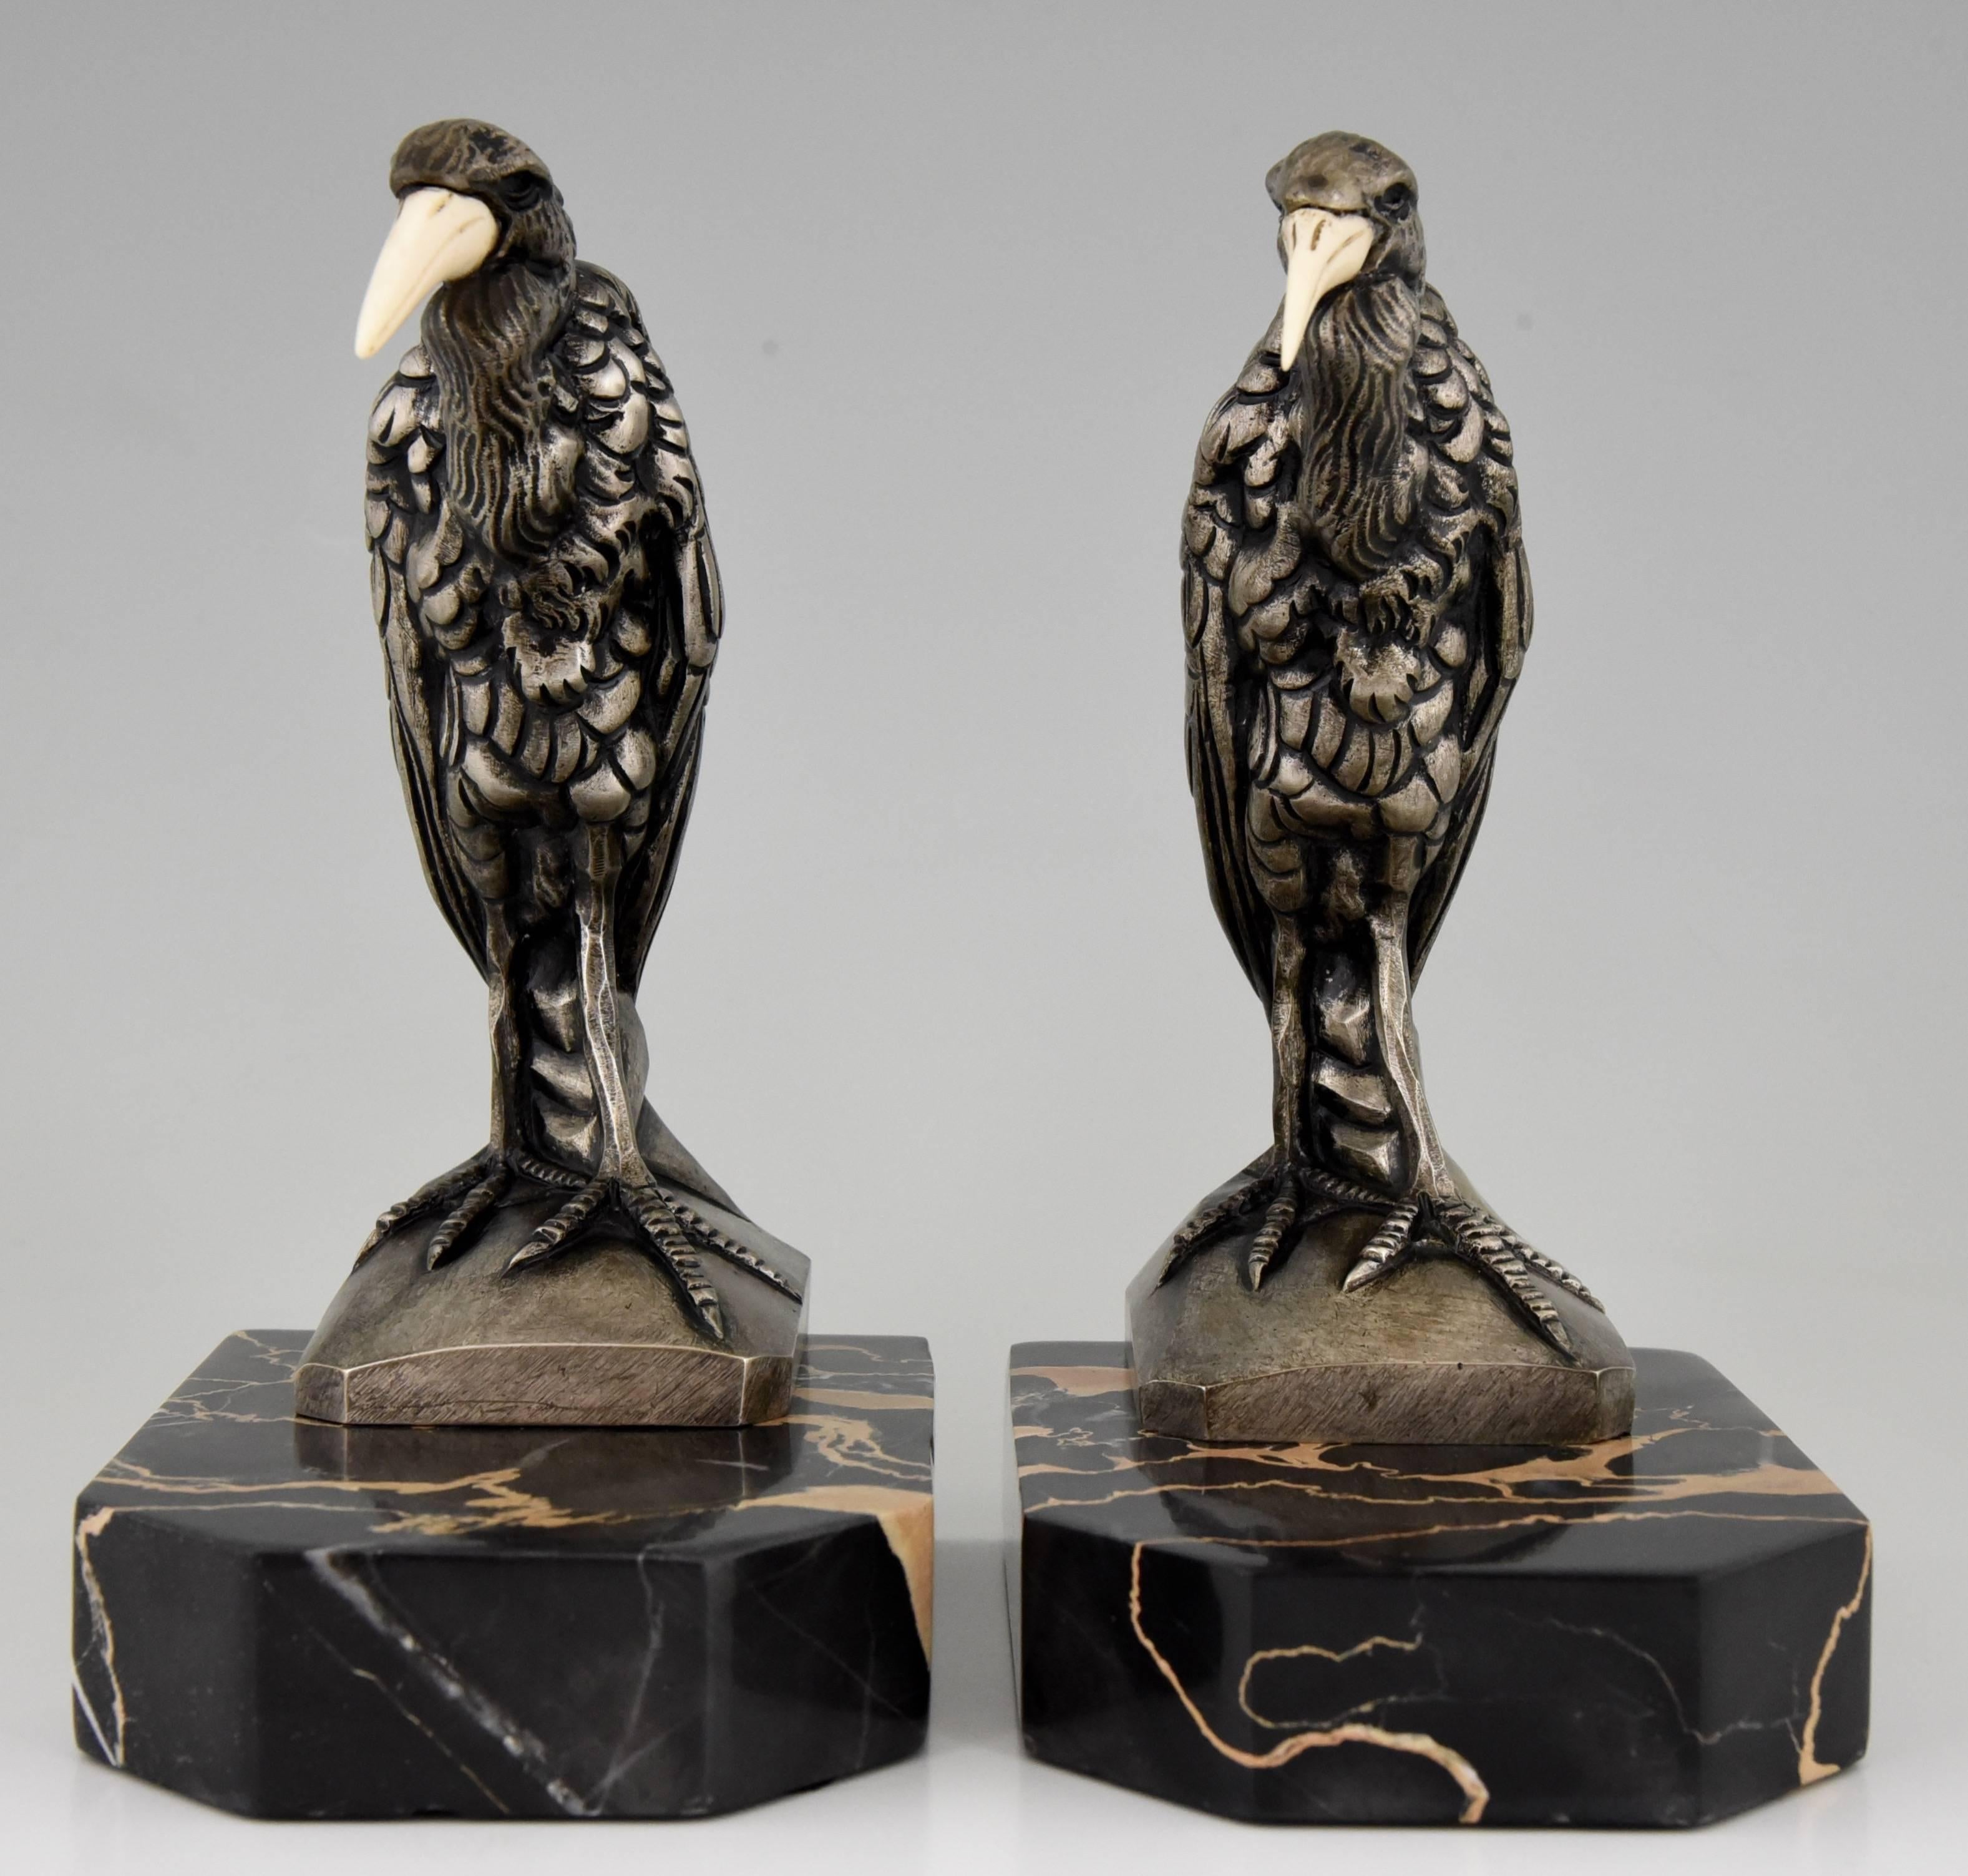 20th Century French Art Deco Silvered Bronze Heron Bookends by Manin, 1930